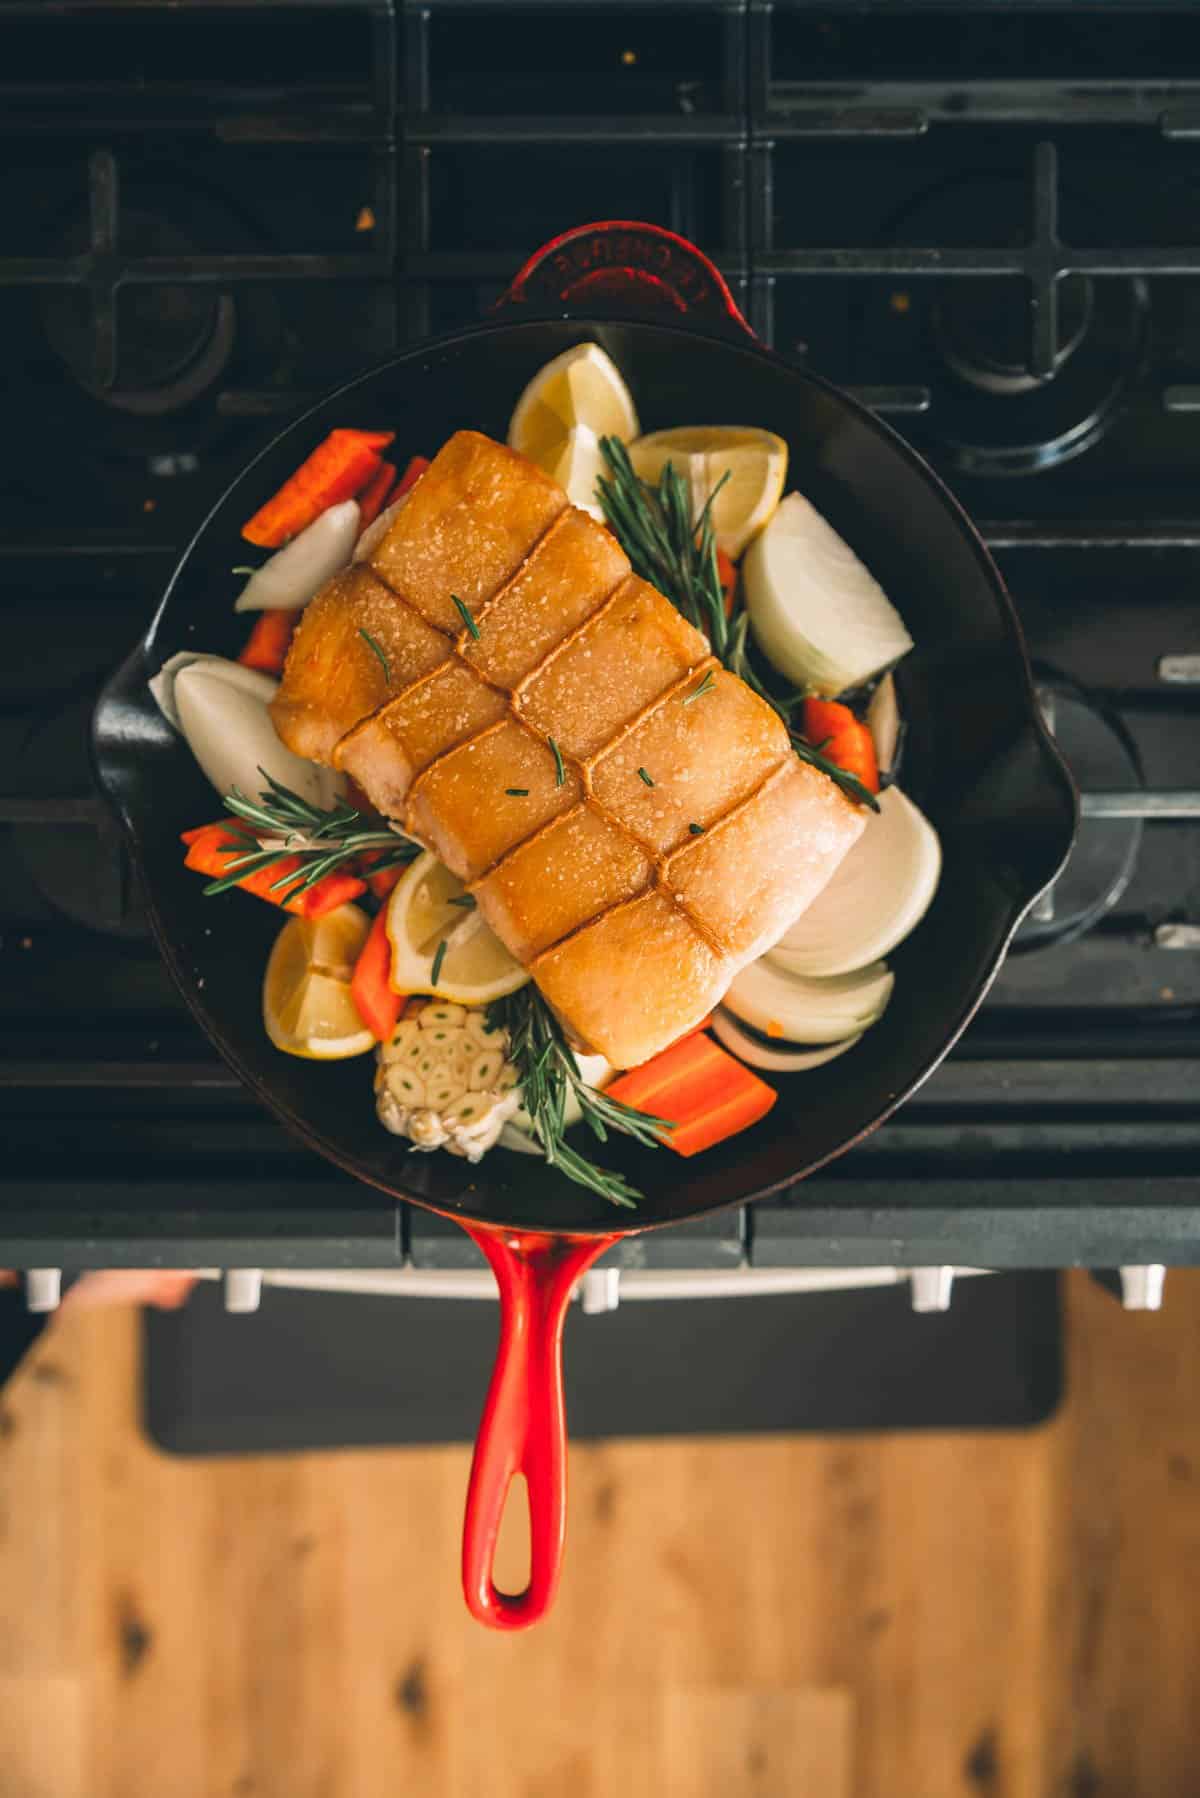 A skillet filled vegetables and a pork loin on a stove top.